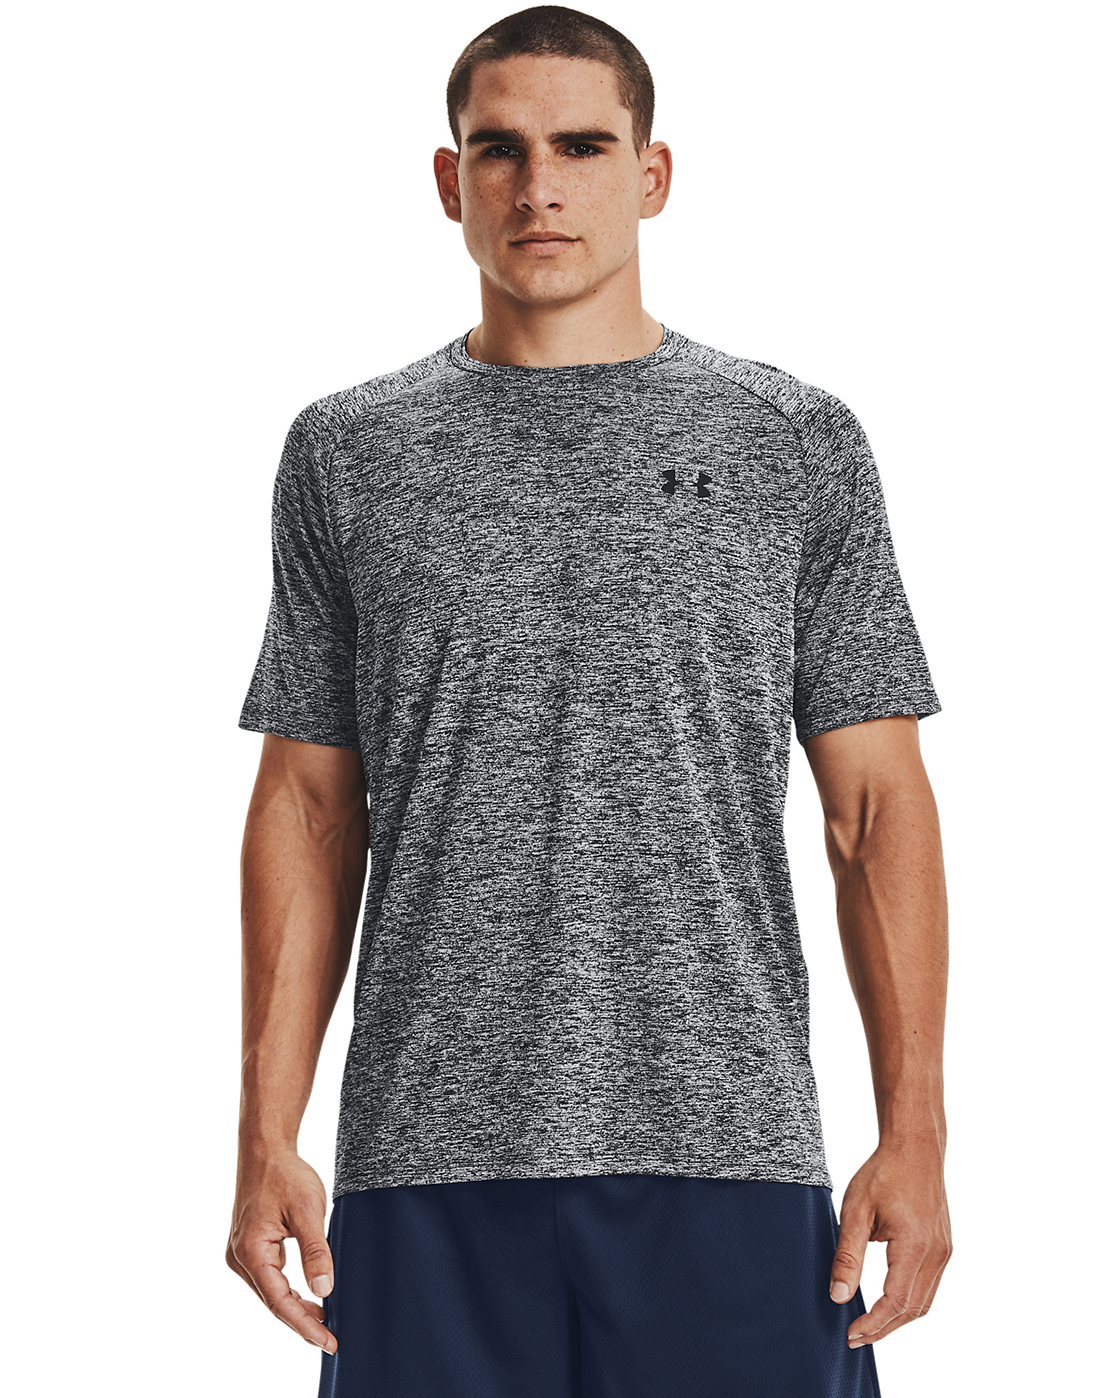 Under Armour Mens Tech 2.0 T-Shirt - Grey | Life Style Sports UK